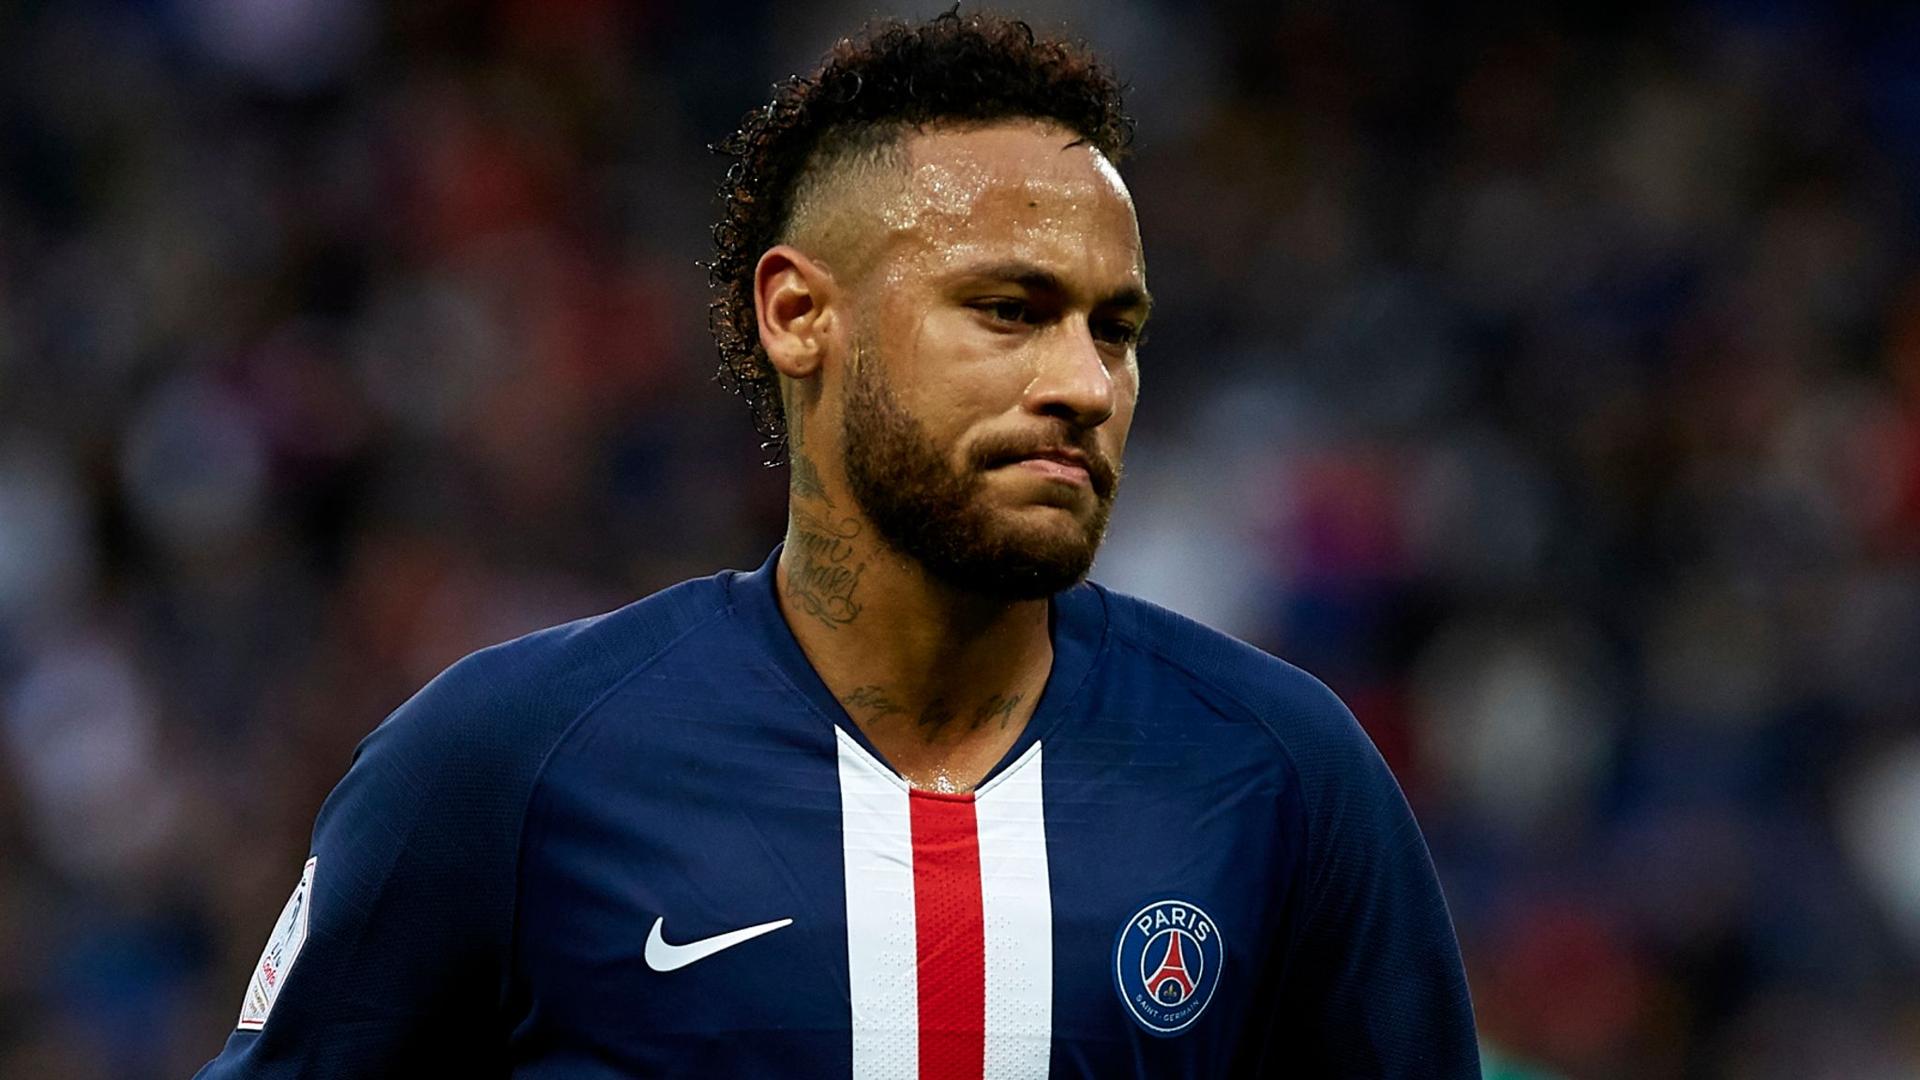 Neymar to Chelsea move: Agent initiates contact as Boehly looks to make statement